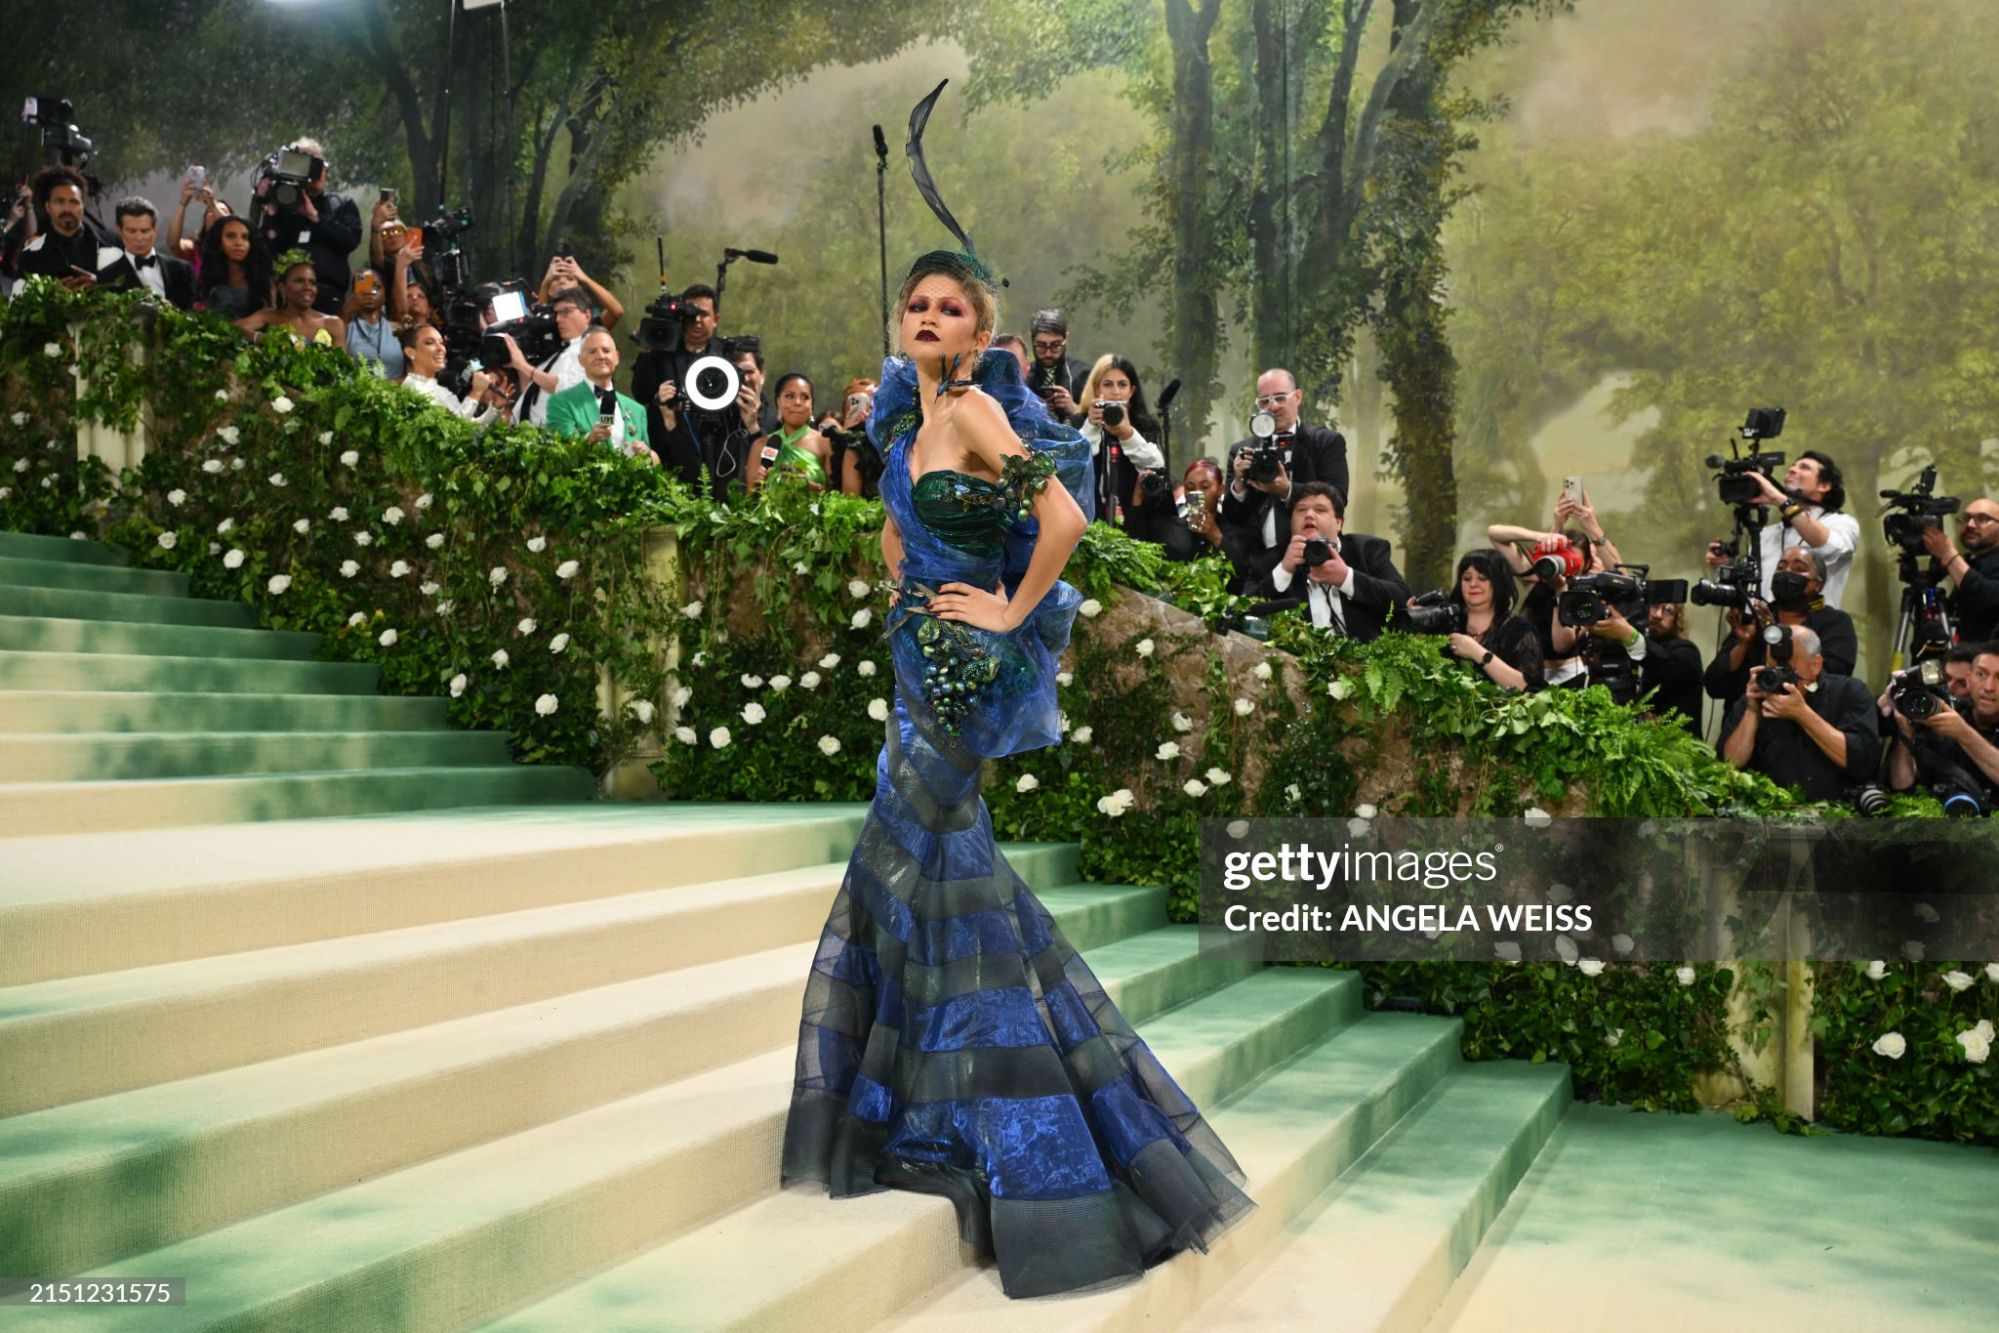 gettyimages-2151231575-2048x2048.jpg